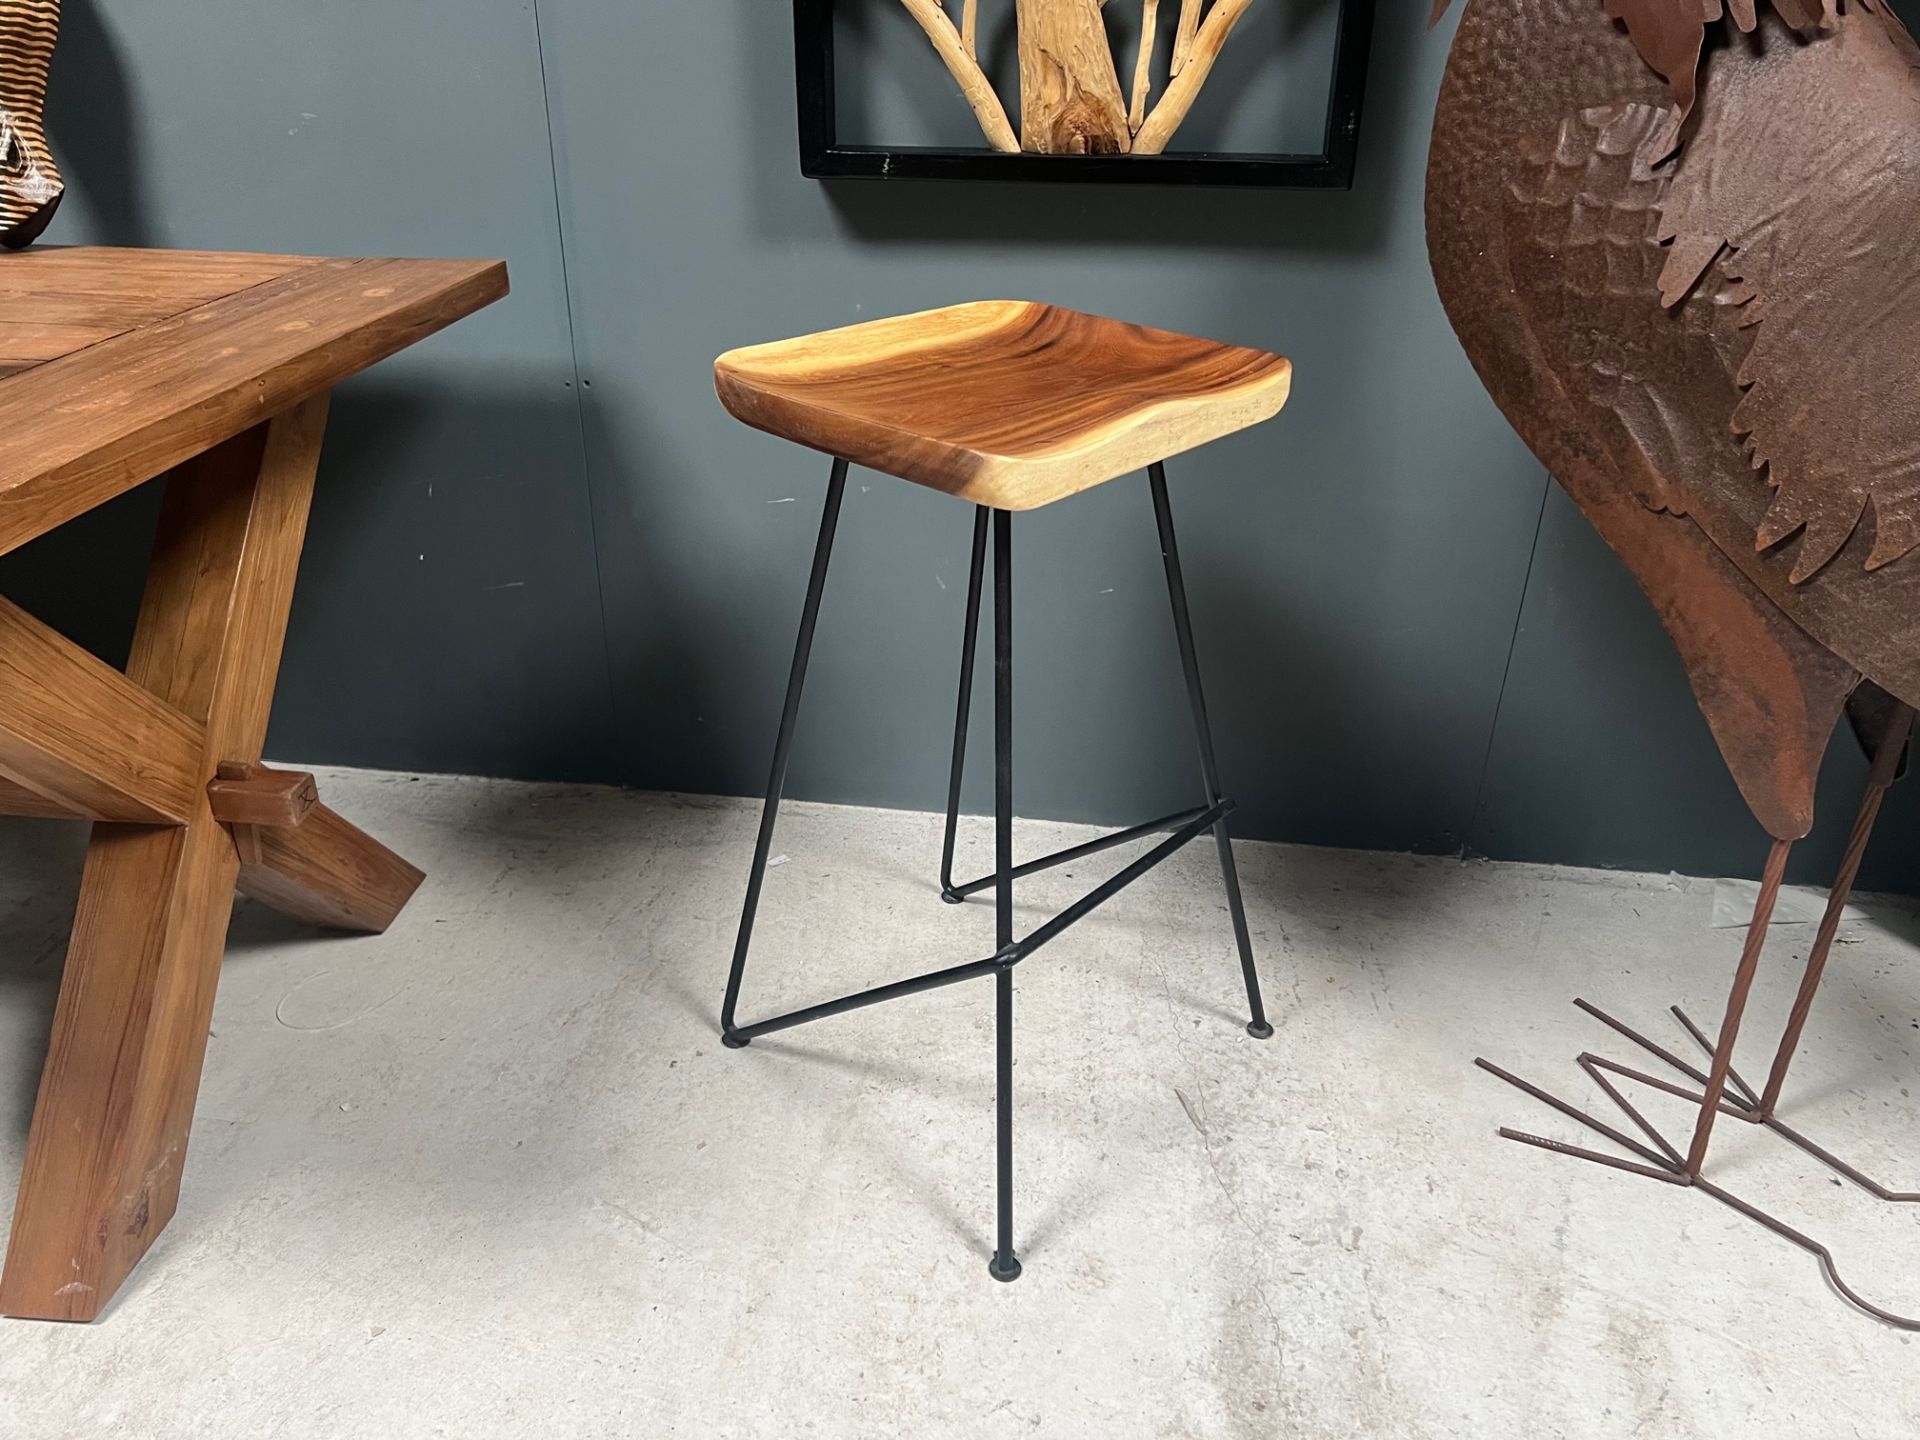 Boxed New Vintage Industrial Bar Stool With Polished Wooden Stool And Metal Base - Bild 2 aus 2